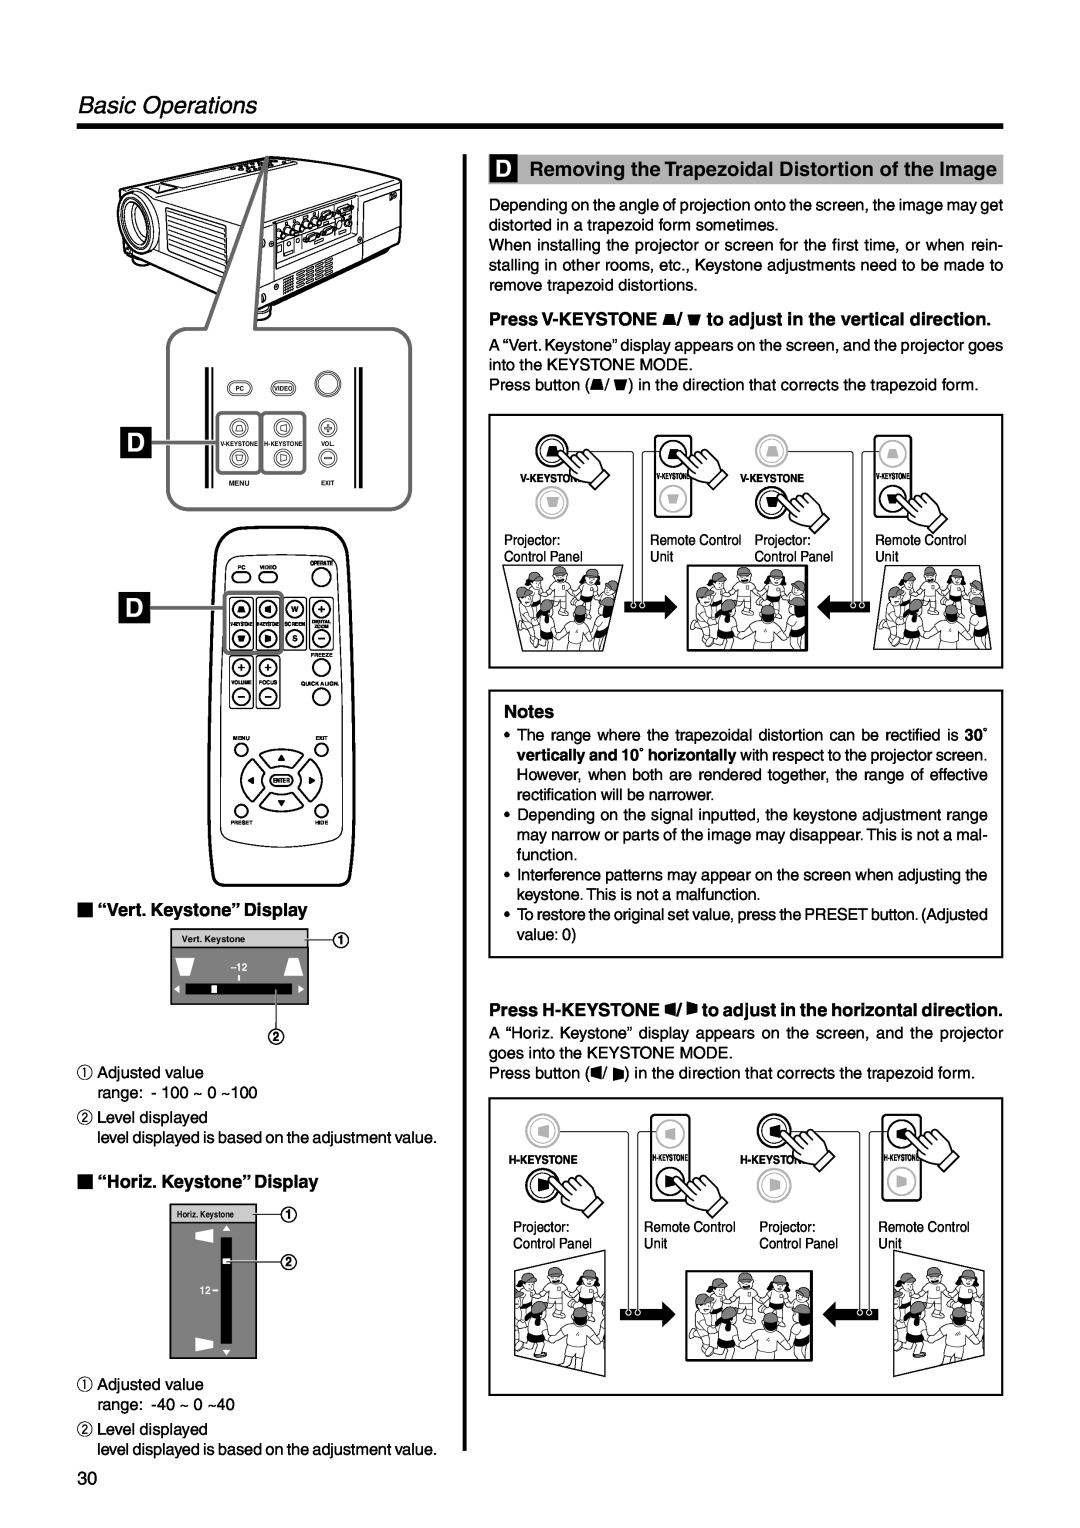 Dukane 28A9017 user manual Basic Operations, Removing the Trapezoidal Distortion of the Image,  “Vert. Keystone” Display 